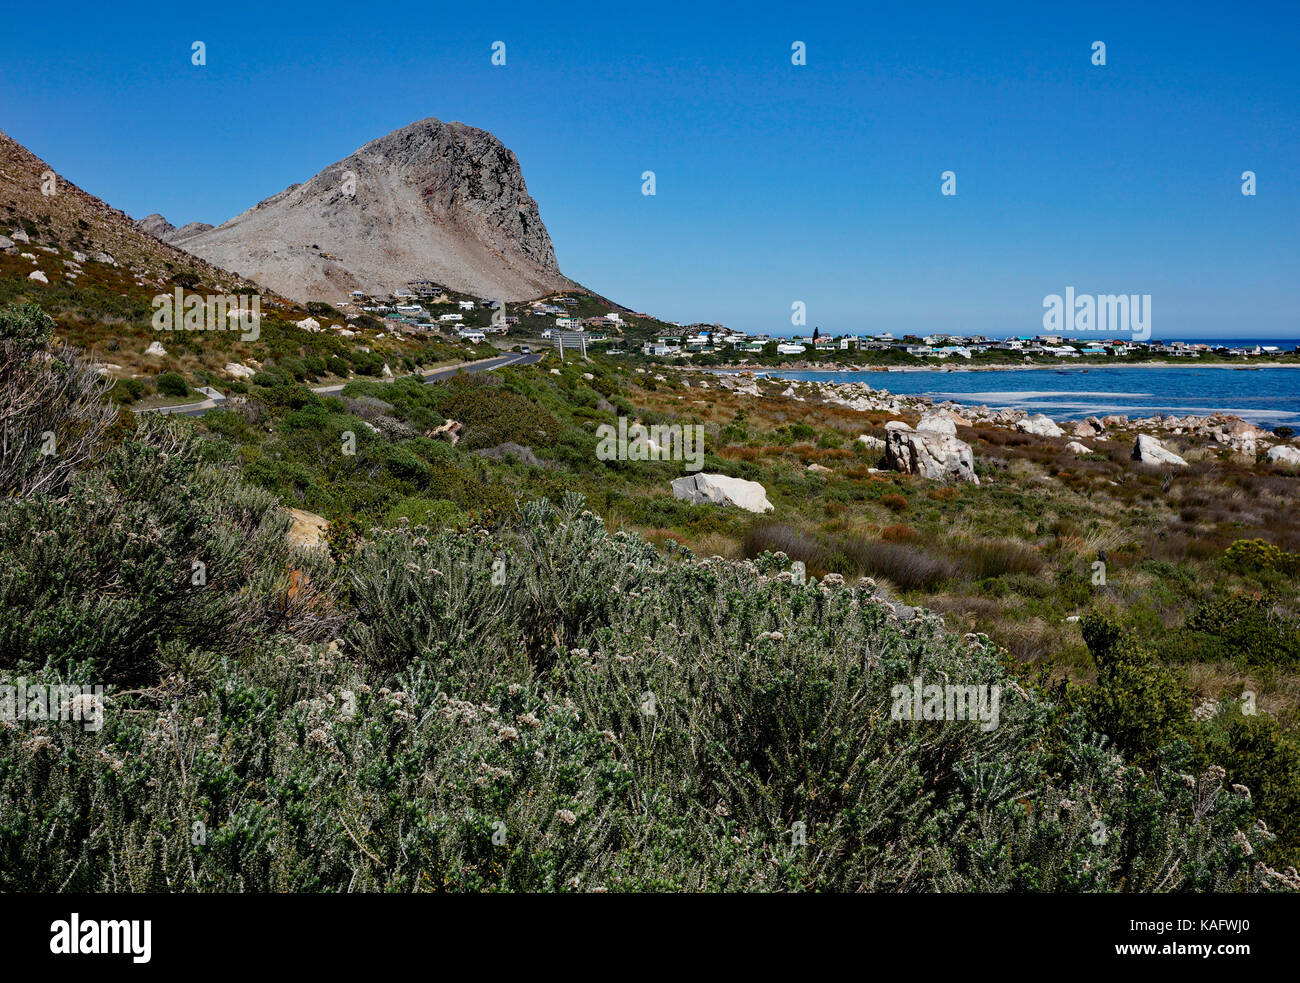 False Bay with Rooi Els in the background, Western Province, South Africa. Stock Photo